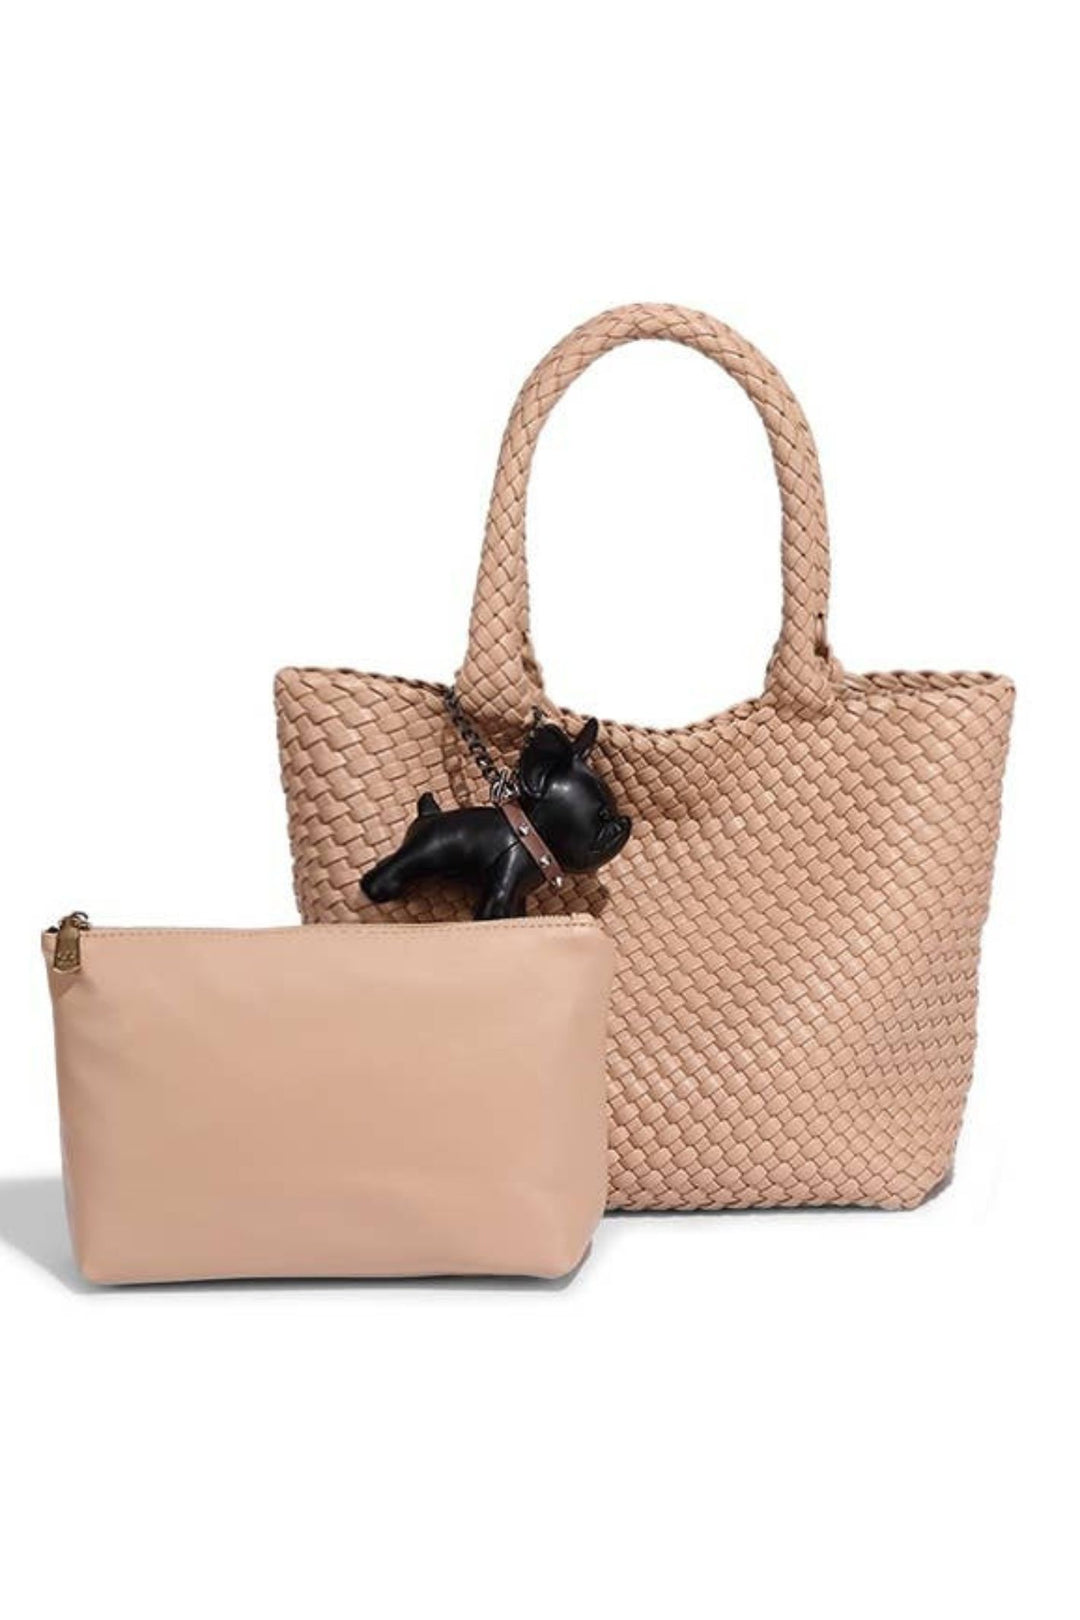 Apricot Hand Woven Faux Leather Bag With Frenchie Charm